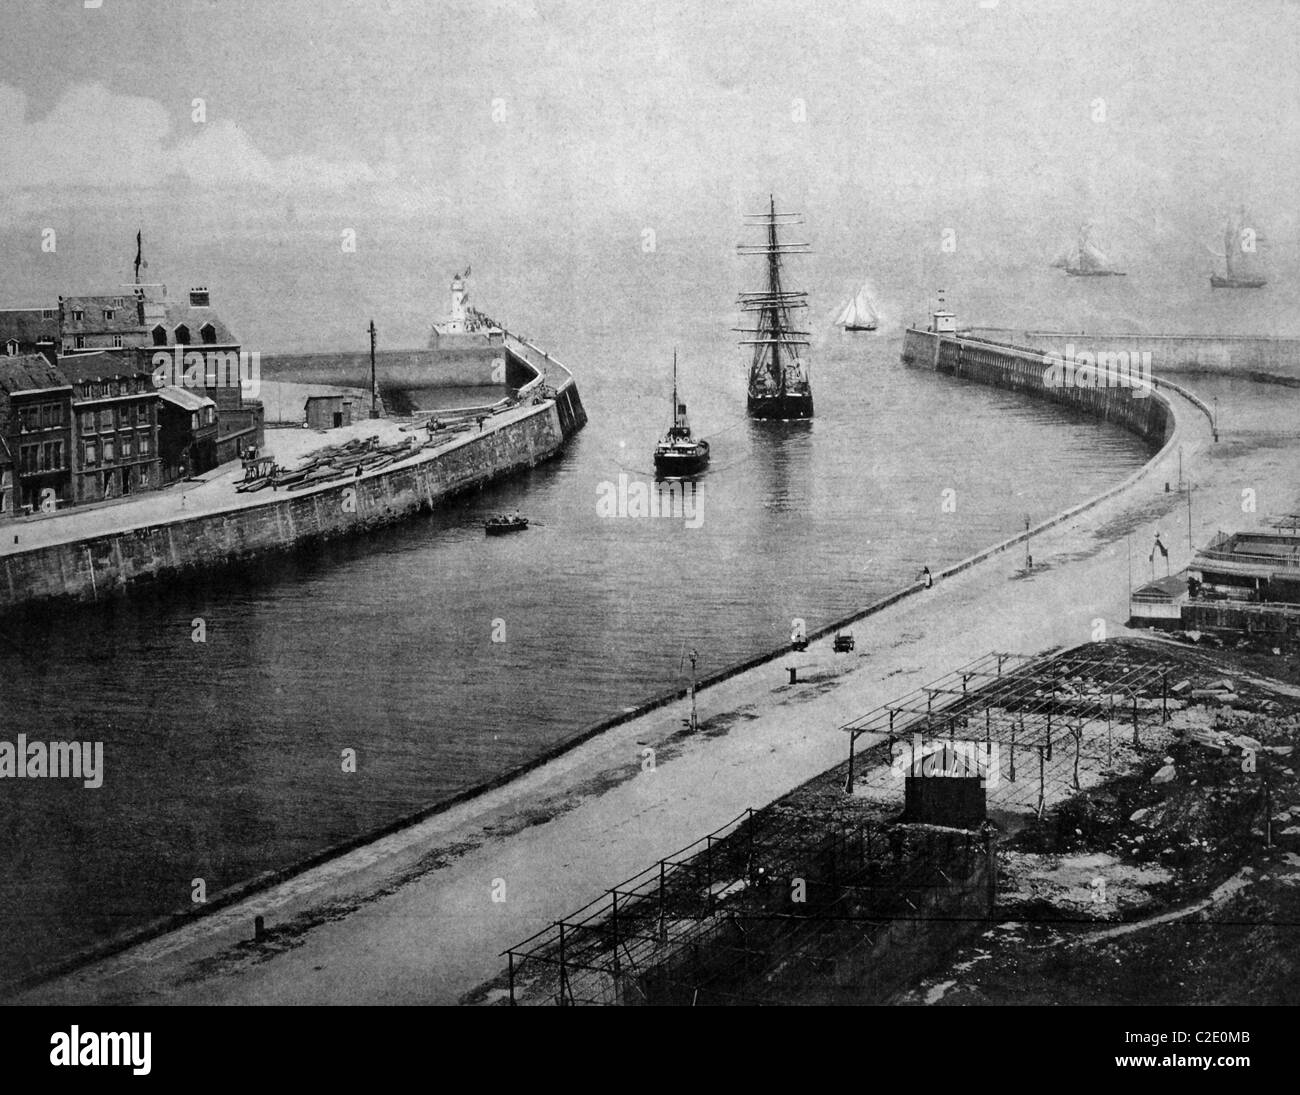 One of the first autotypes of the harbor of Dieppe, France, historical photograph, 1884 Stock Photo